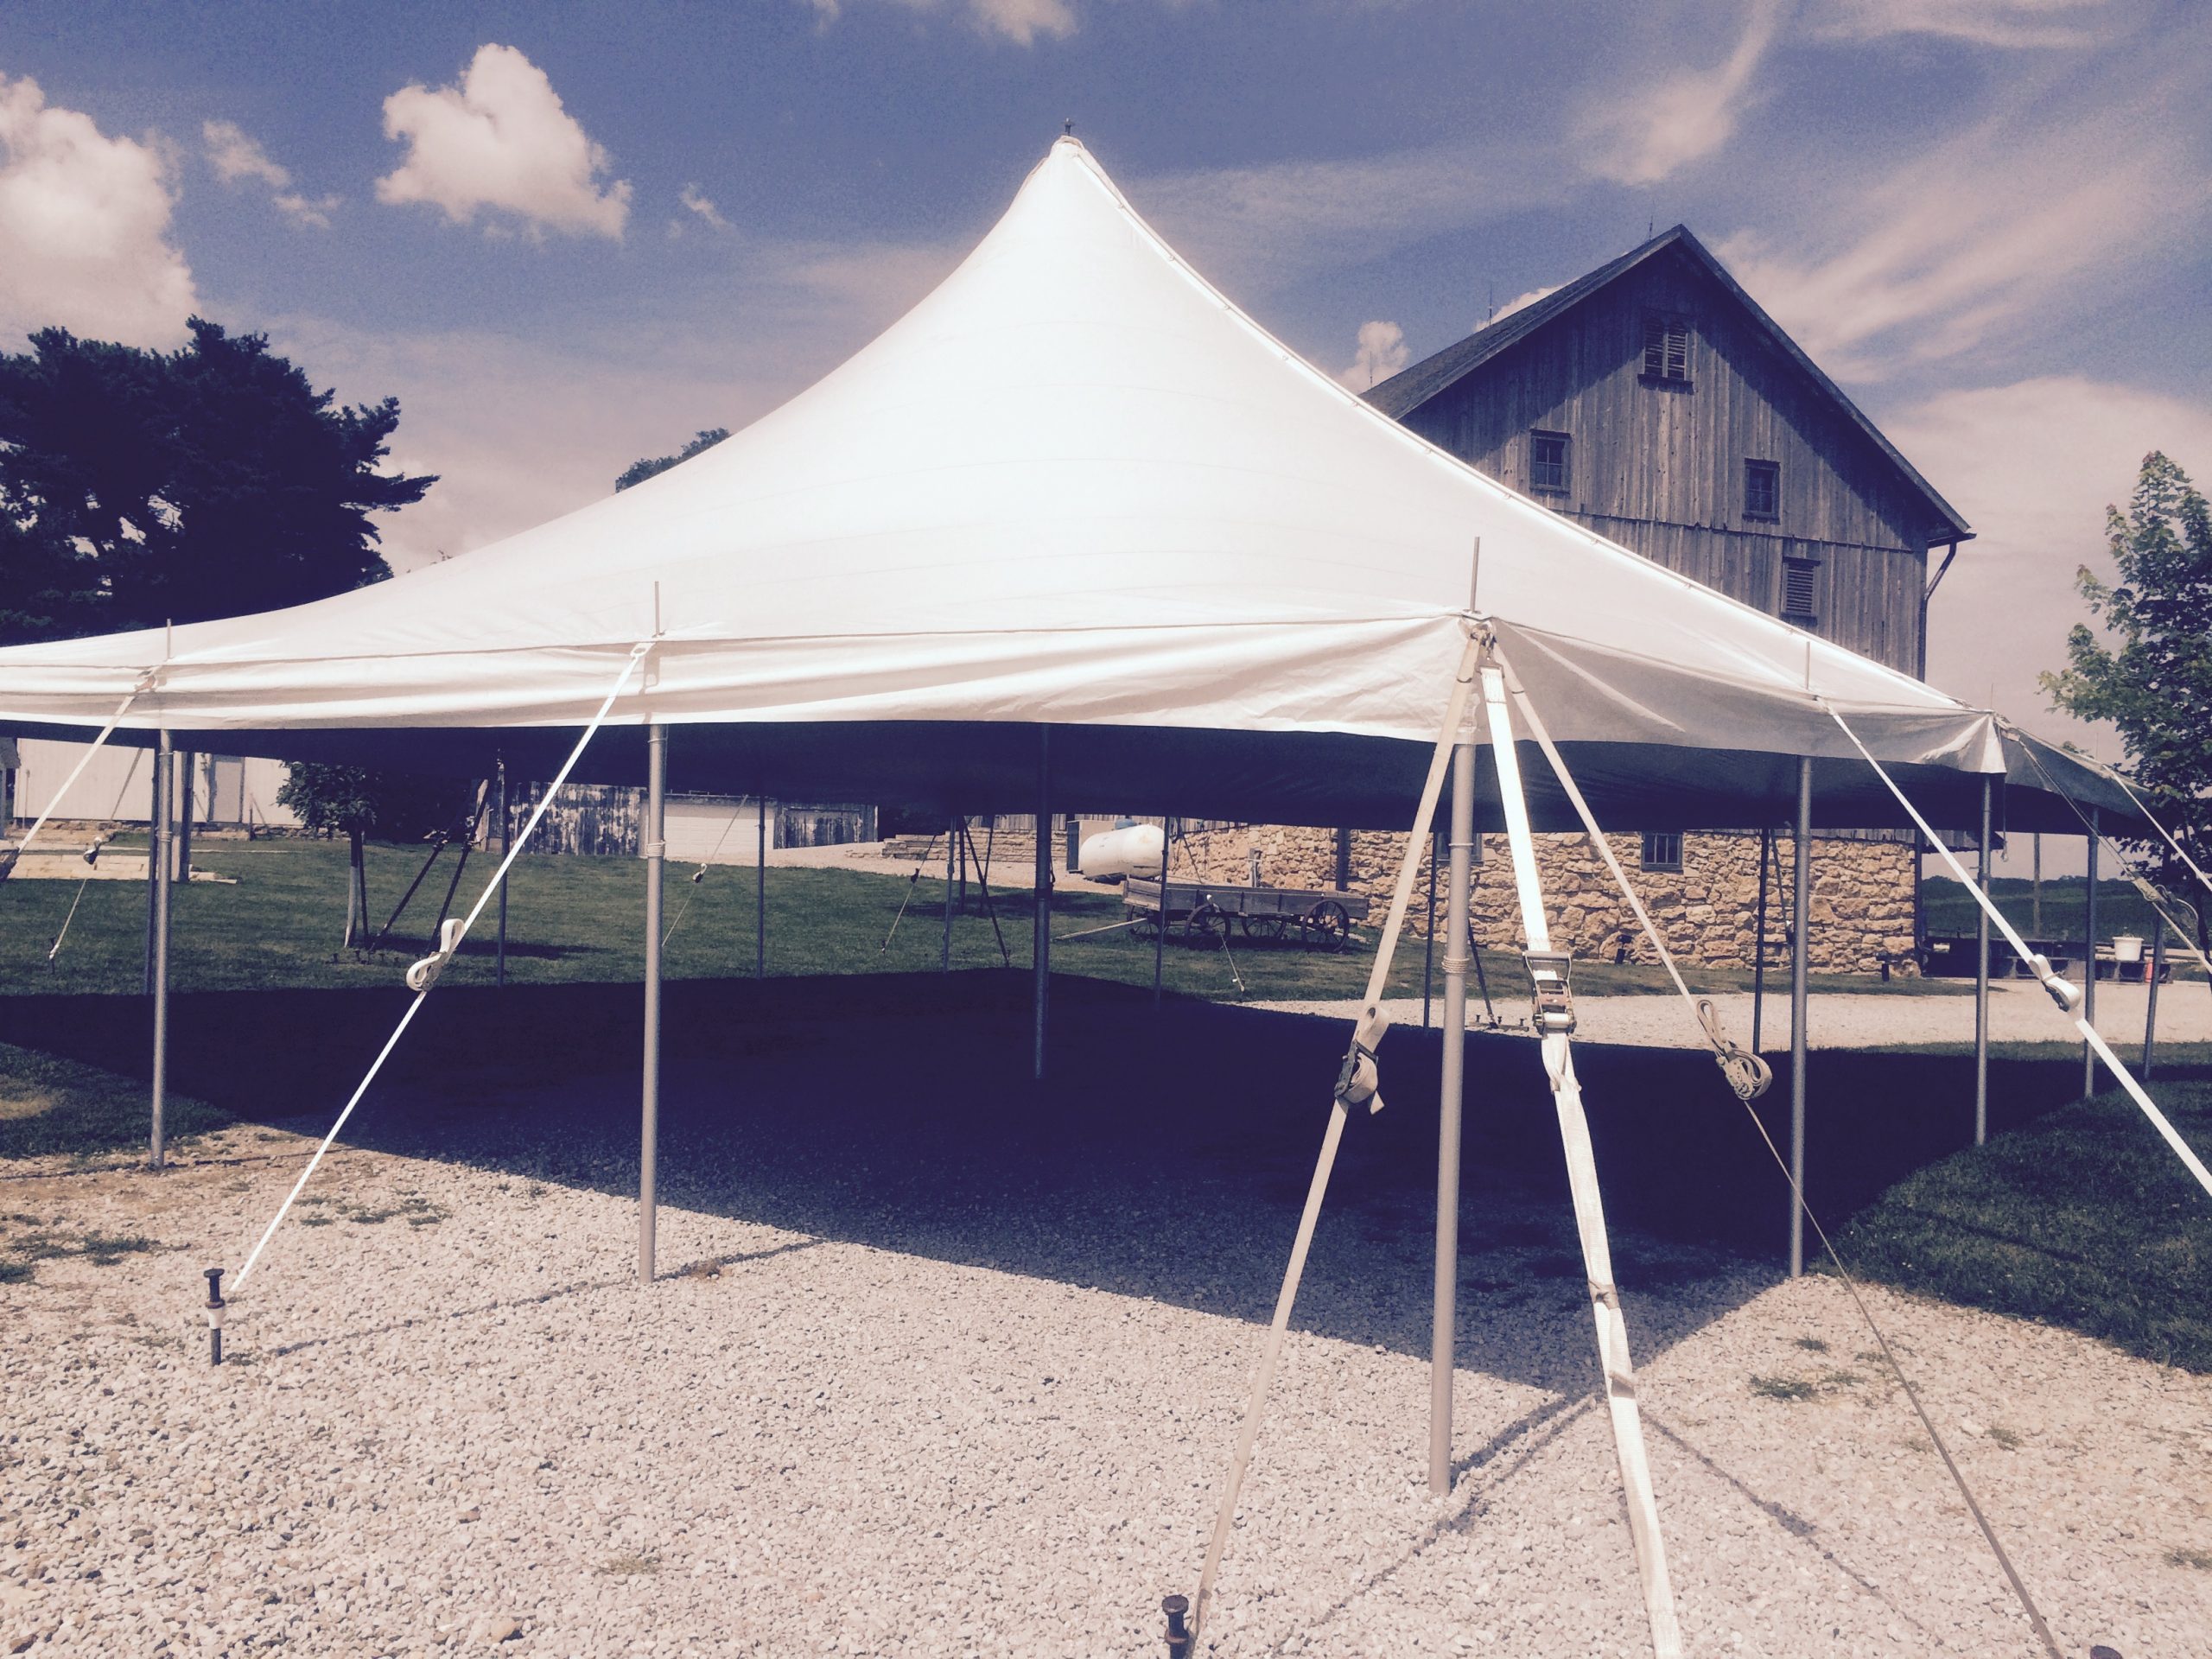 Tents at Sutliff Cider Company by the barn